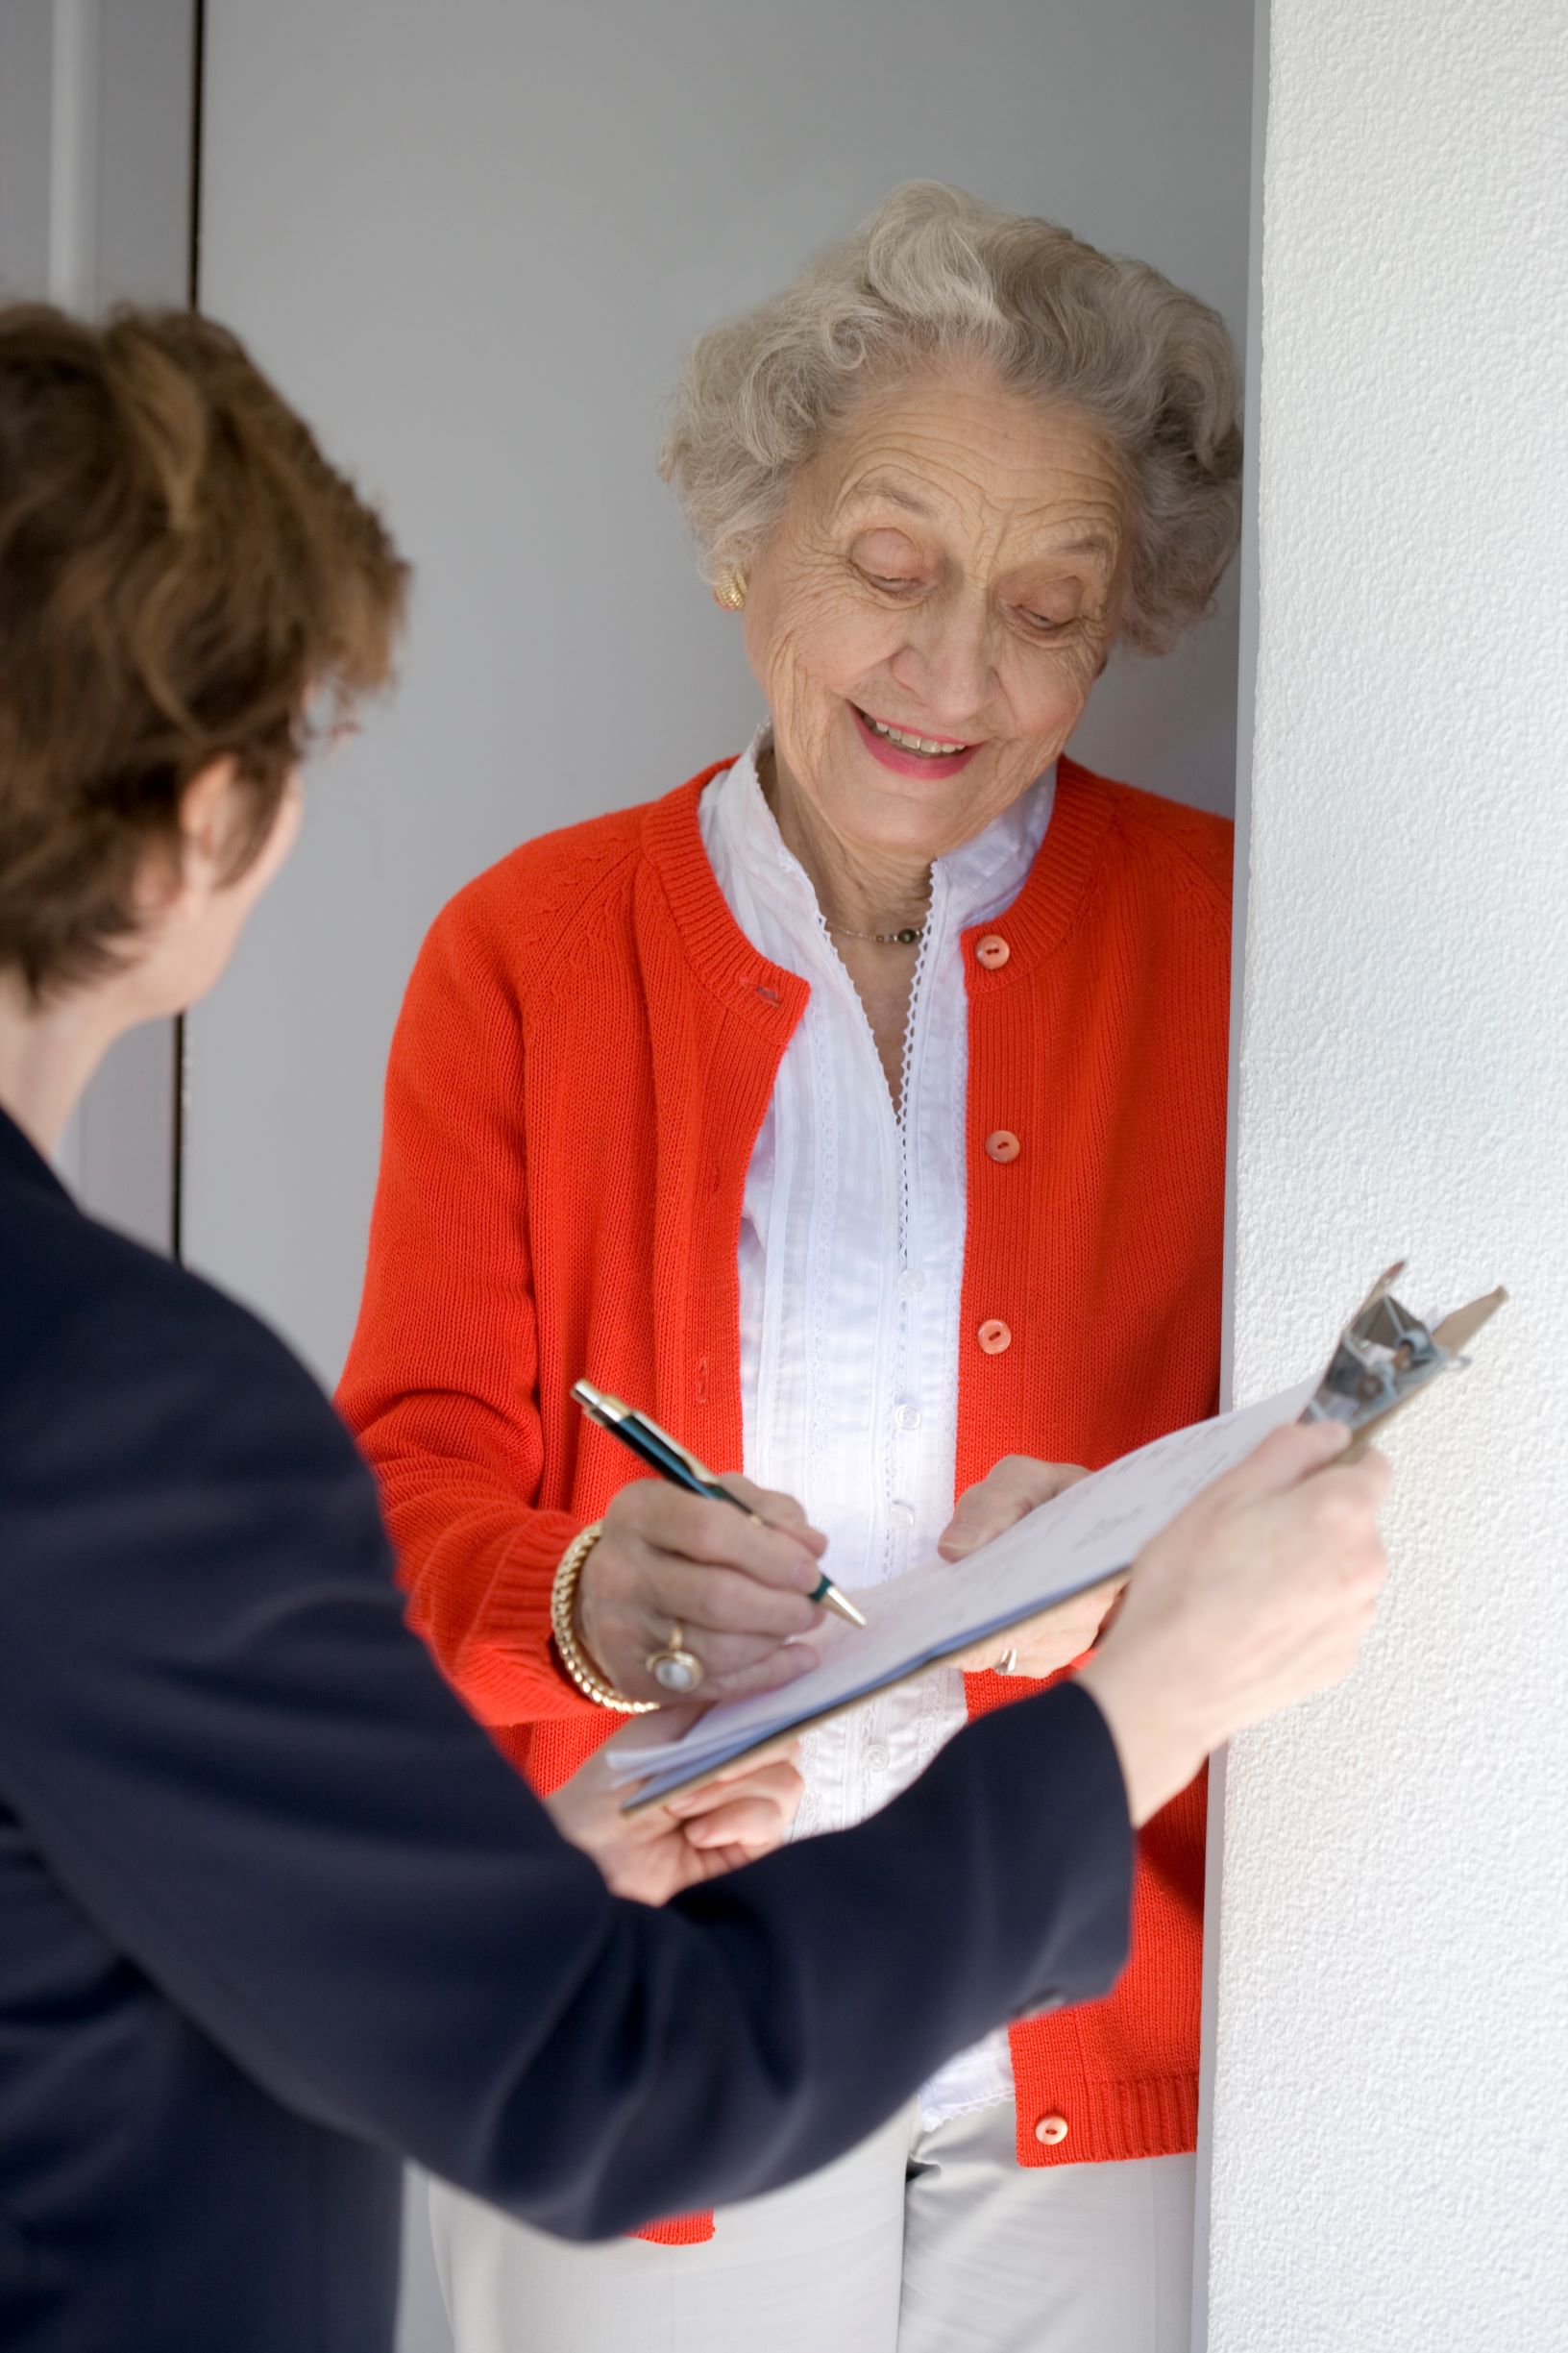 Smiling senior woman completing form